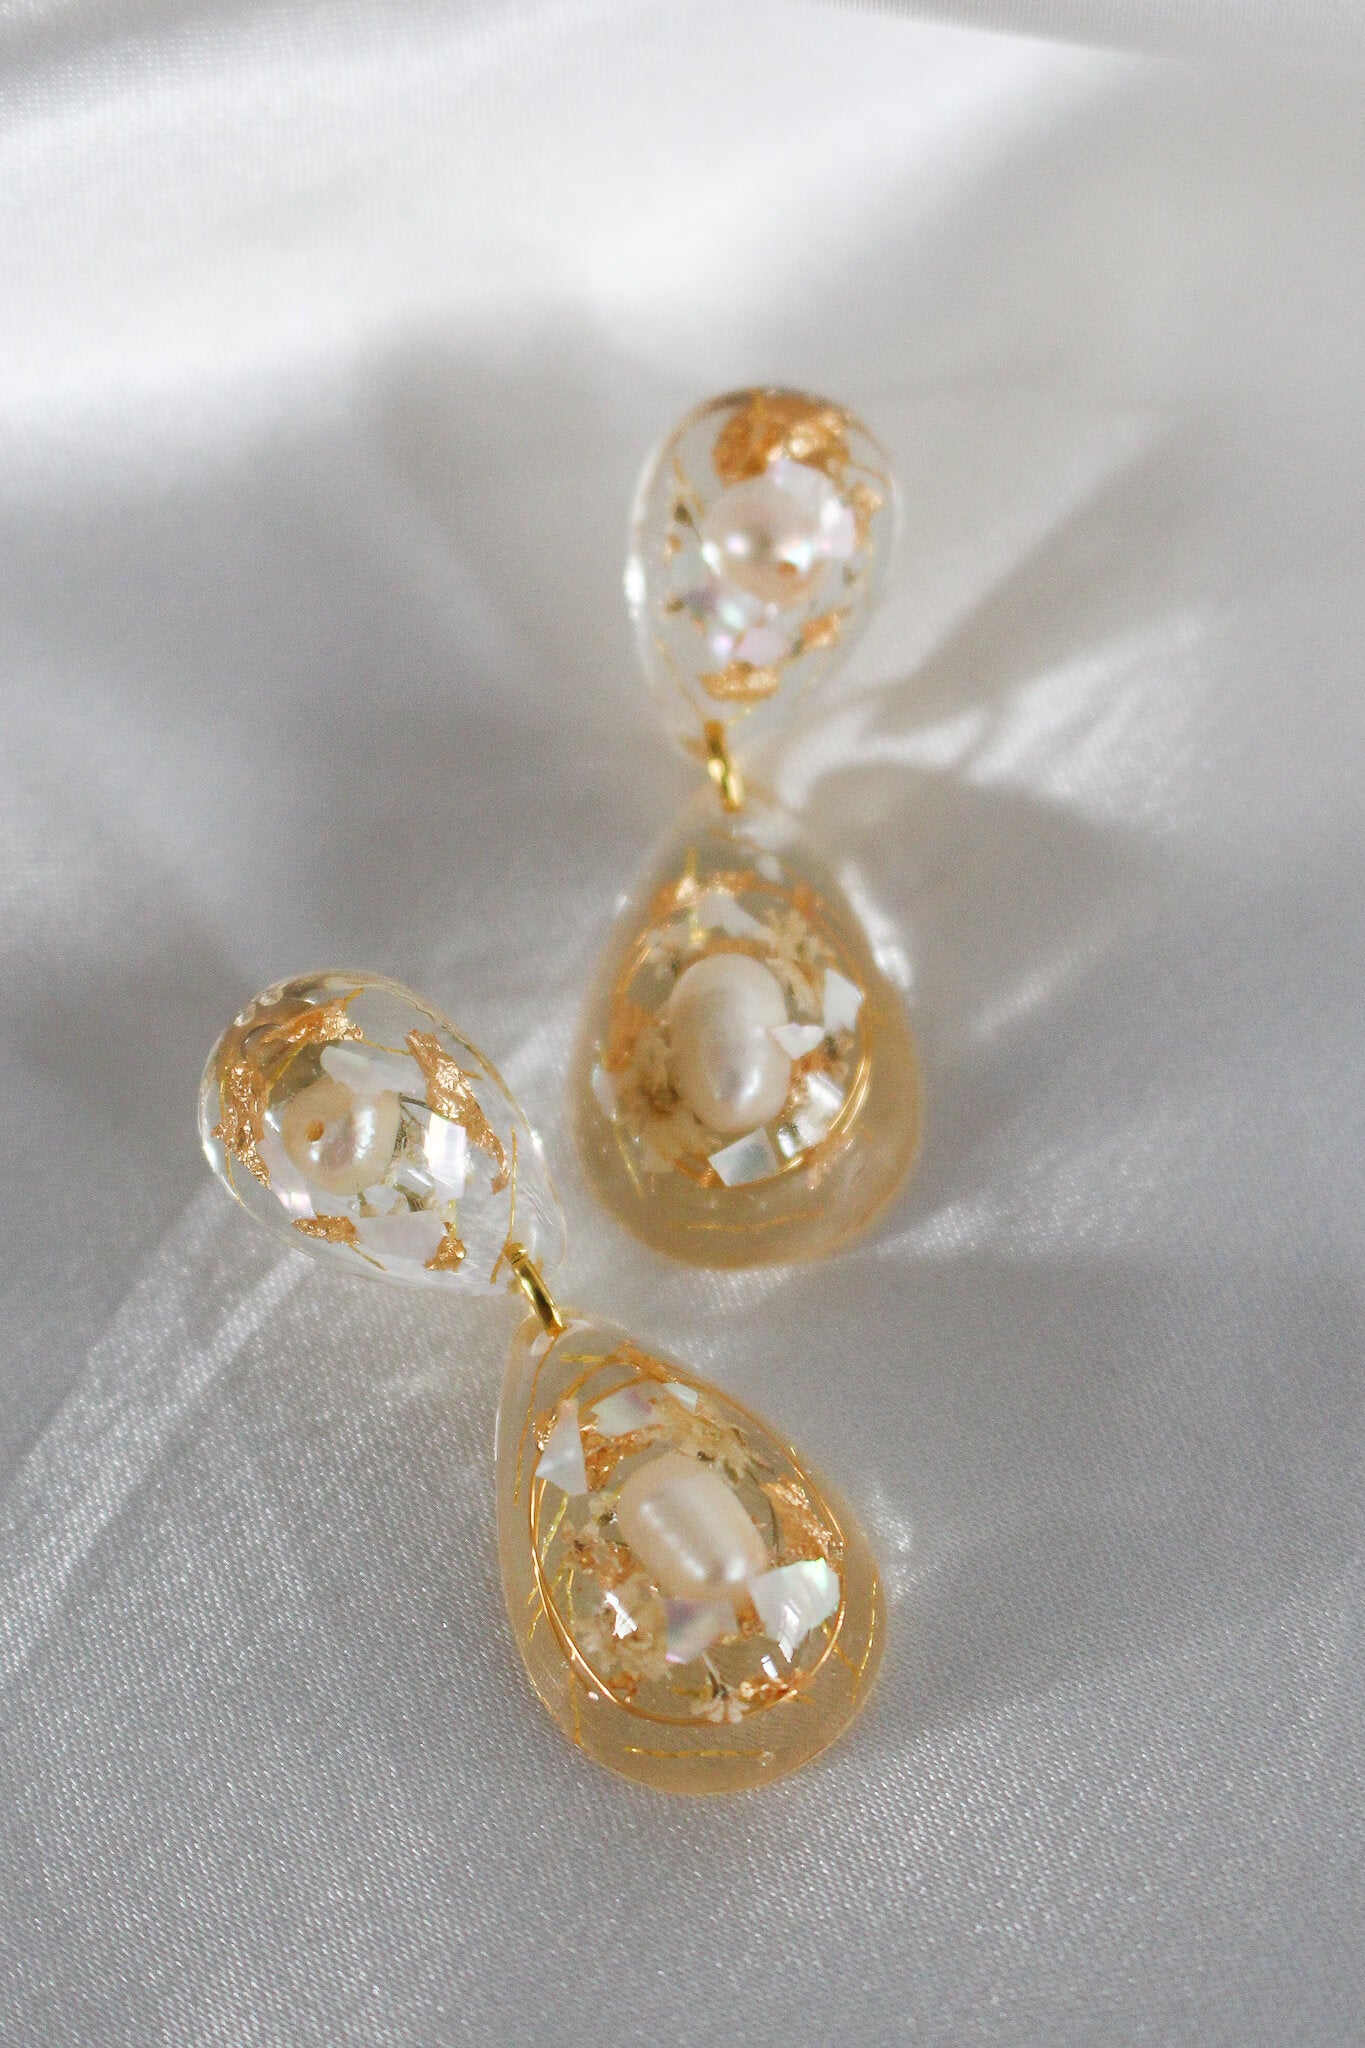 Handmade resin earrings, with pearl and gold flakes embedded